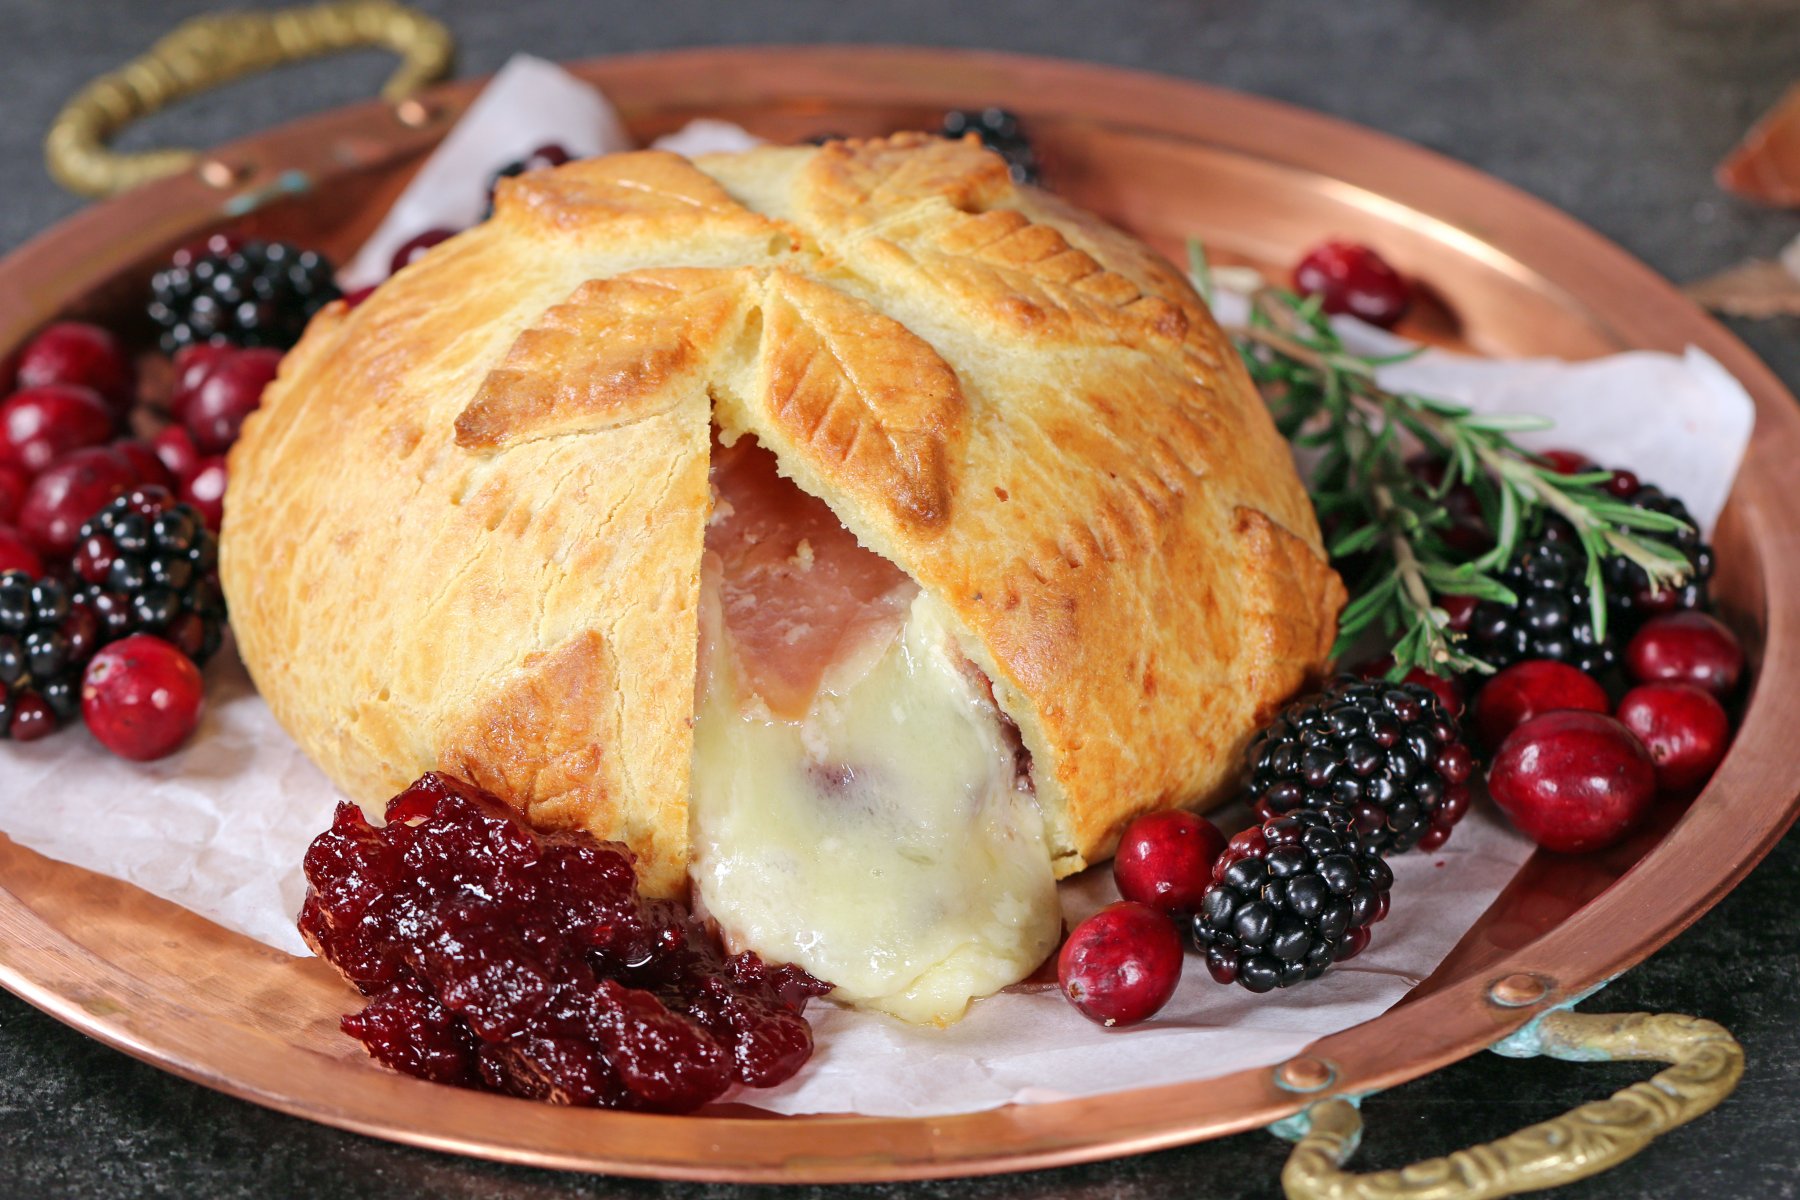 FULLY COOKED BAKED BRIE CUT OPEN